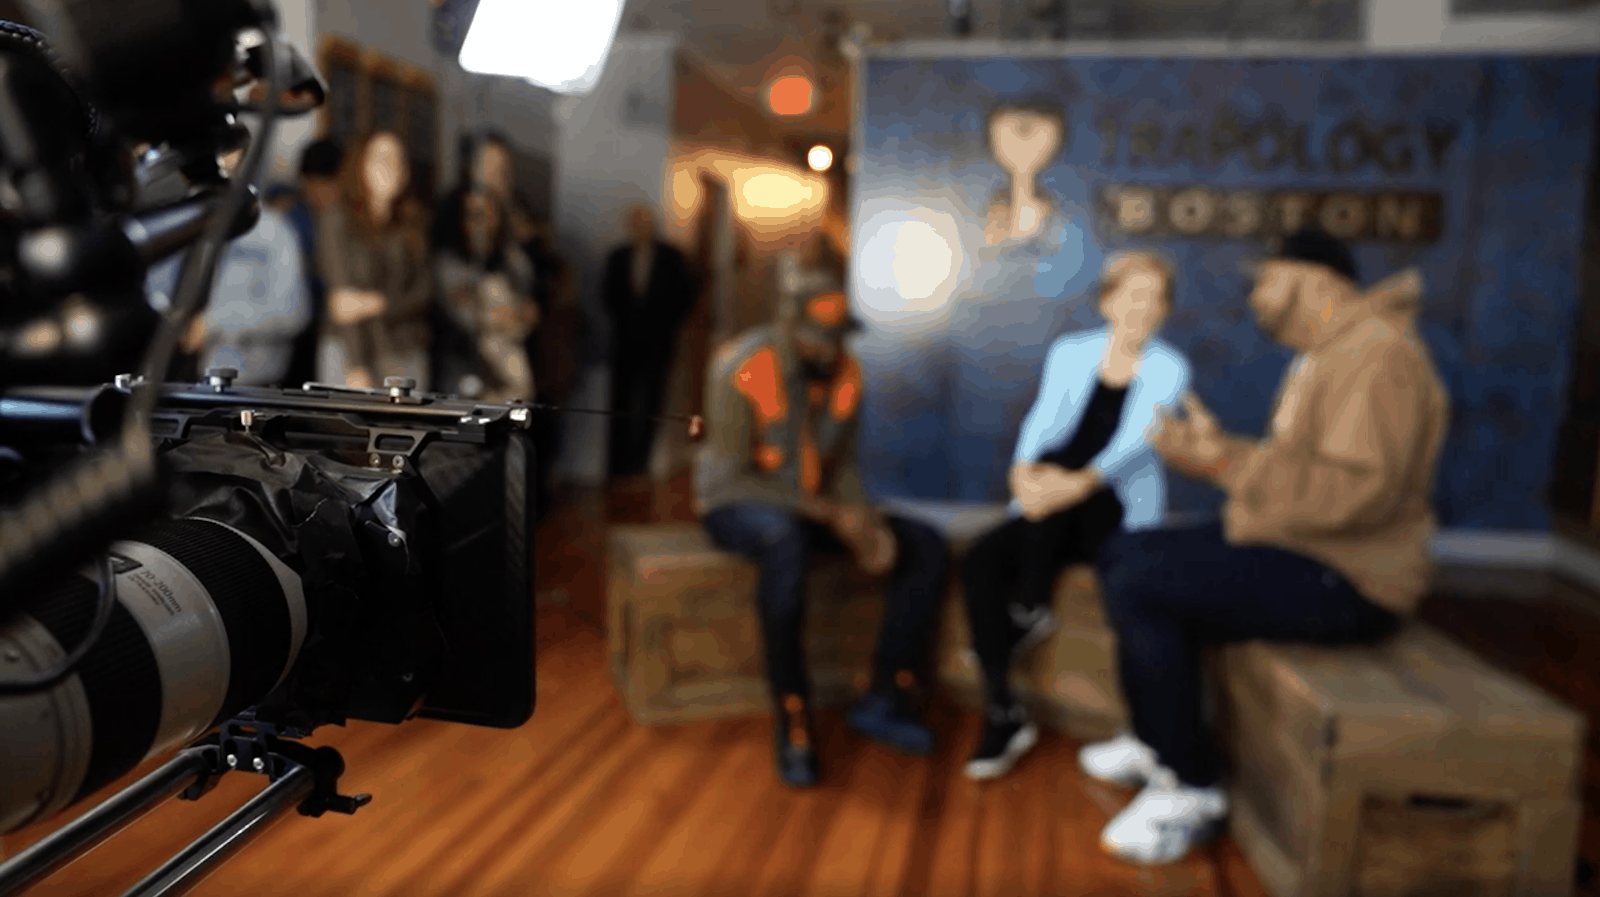 Trapology Year In Review 2019. Elizabeth Warren, Desus and Mero play Crush Depth escape game at Trapology Boston